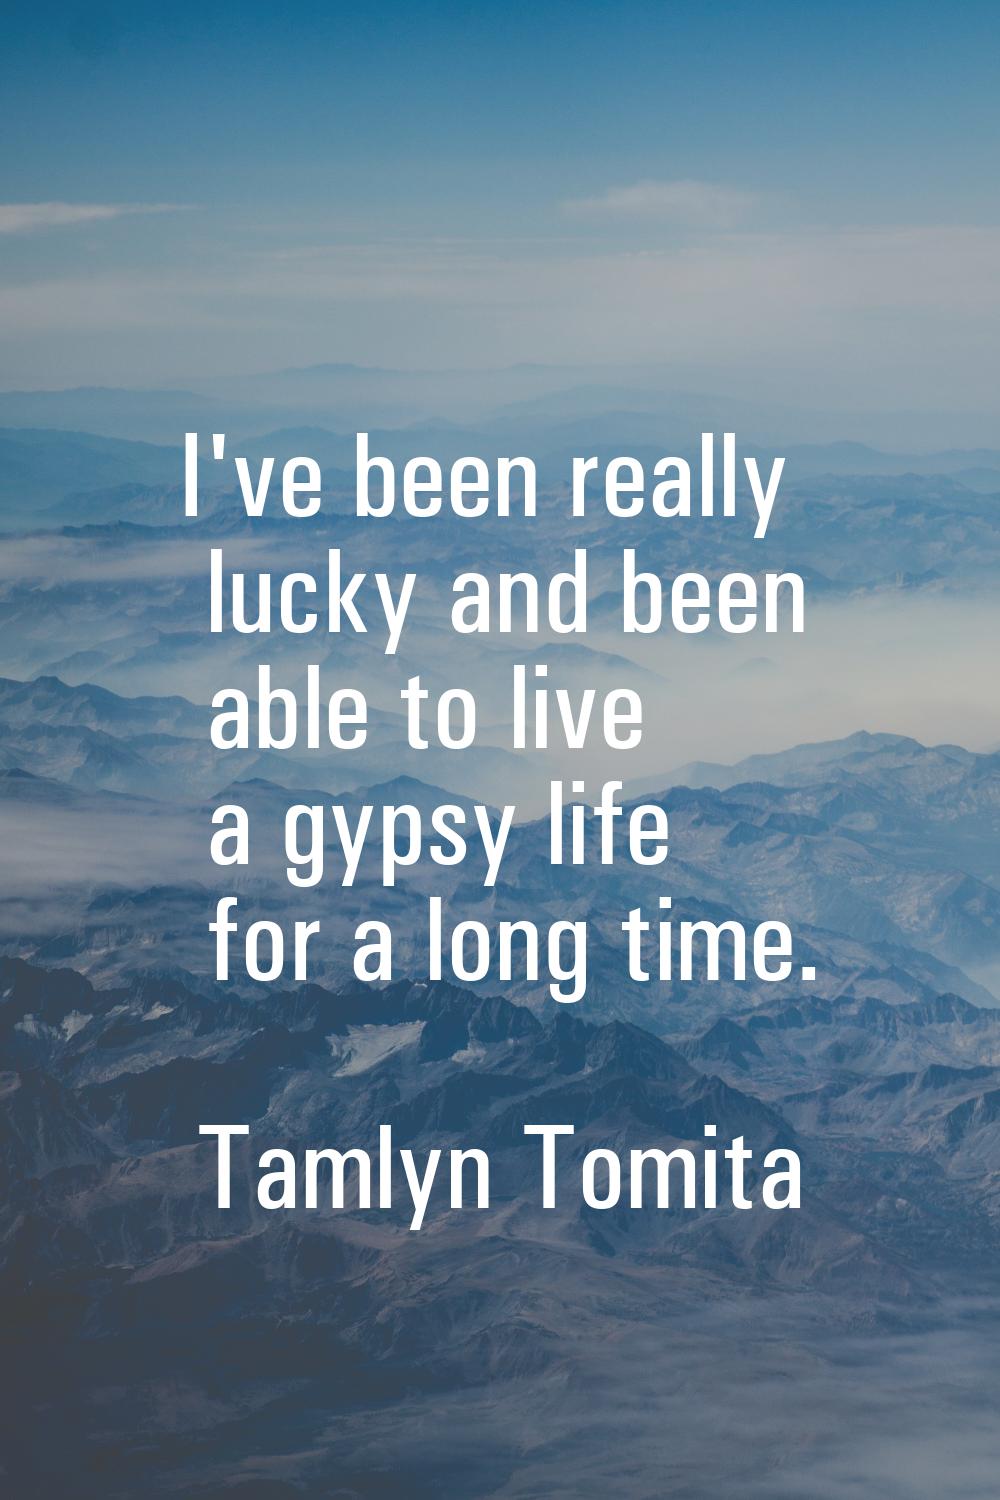 I've been really lucky and been able to live a gypsy life for a long time.